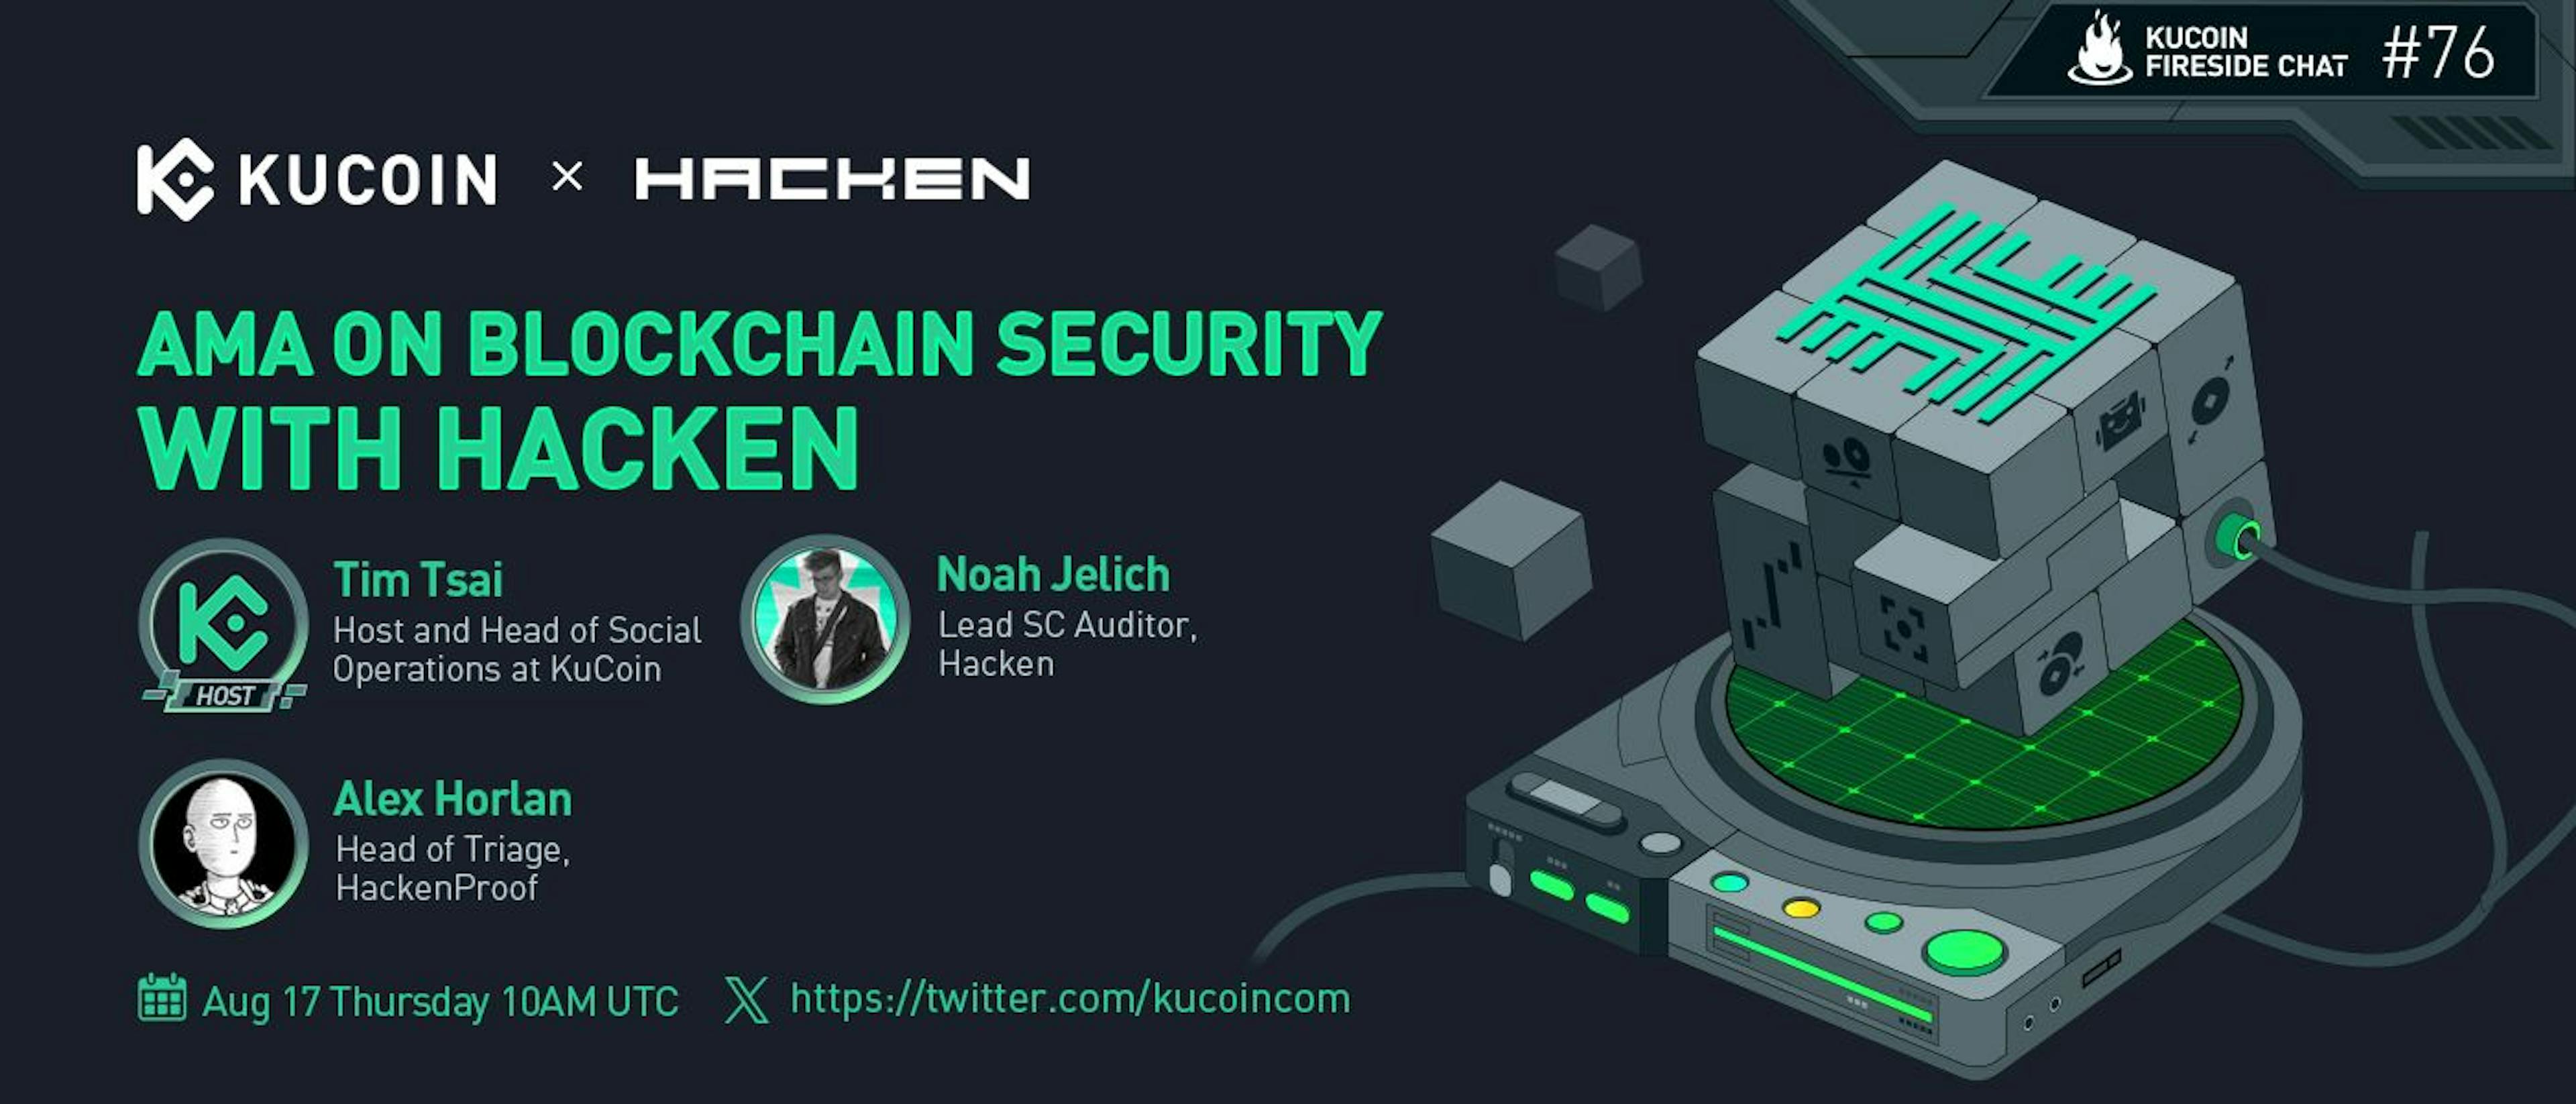 featured image - Security for Blockchain with KuCoin and Hacken